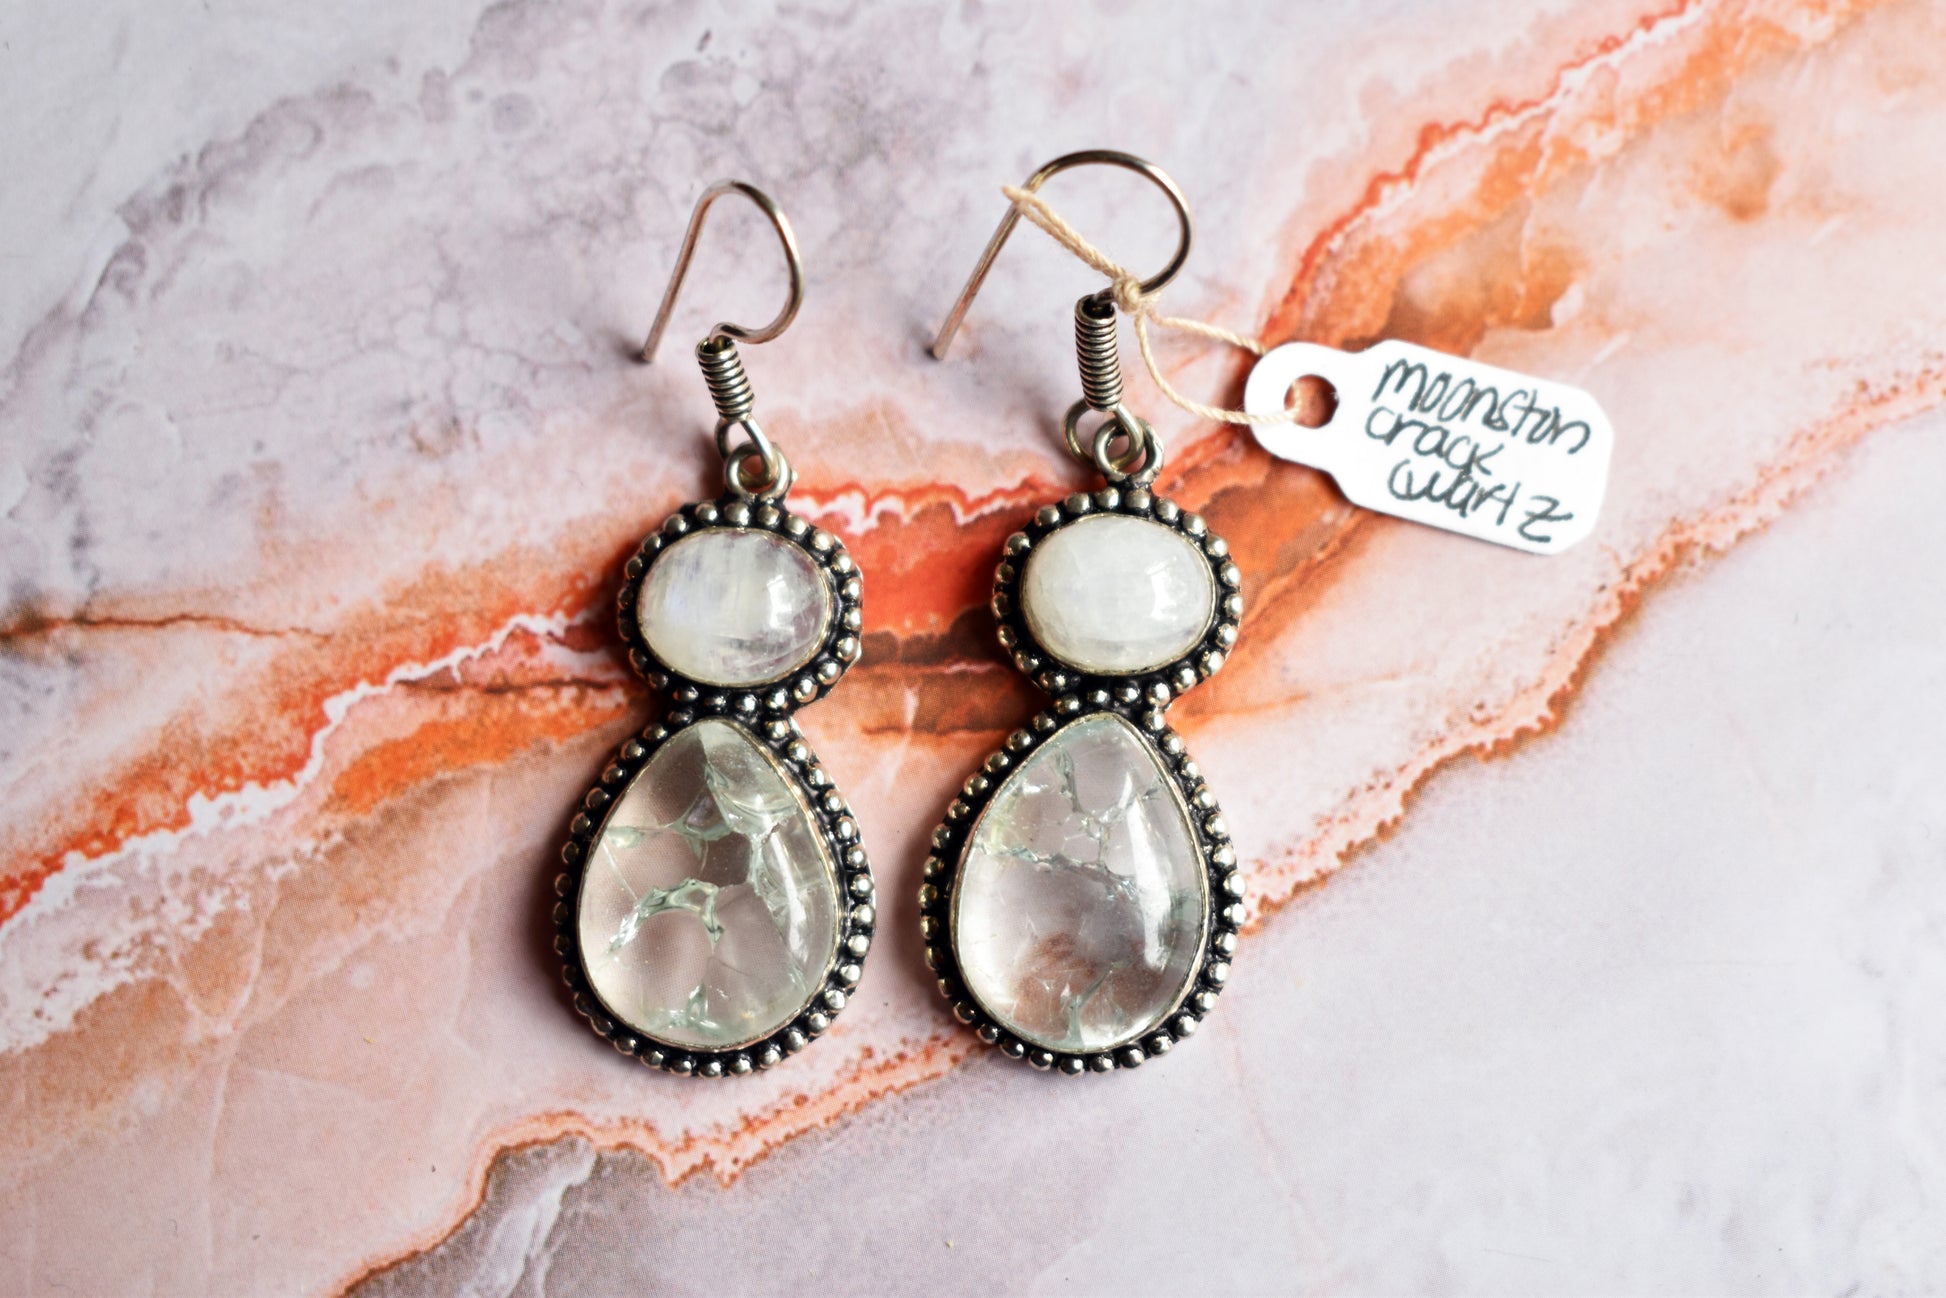 stones-of-transformation - Moonstone with Cracked Quartz Earrings - Stones of Transformation - 